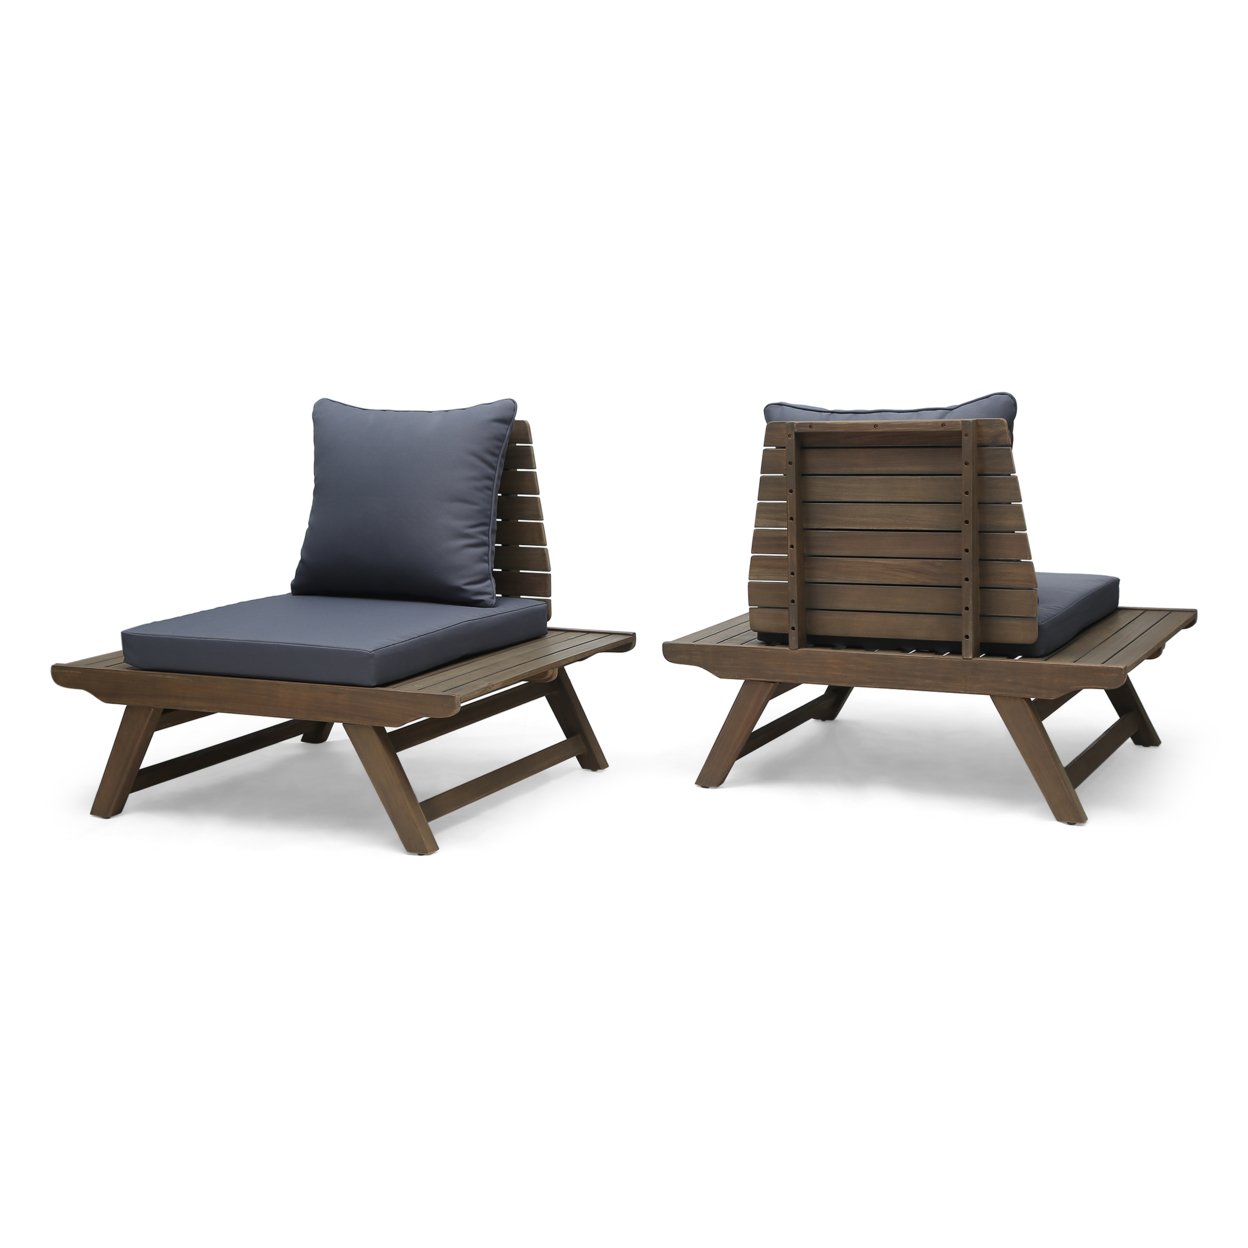 Kailee Outdoor Wooden Club Chairs With Cushions (Set Of 2) - Dark Gray + Gray Finish